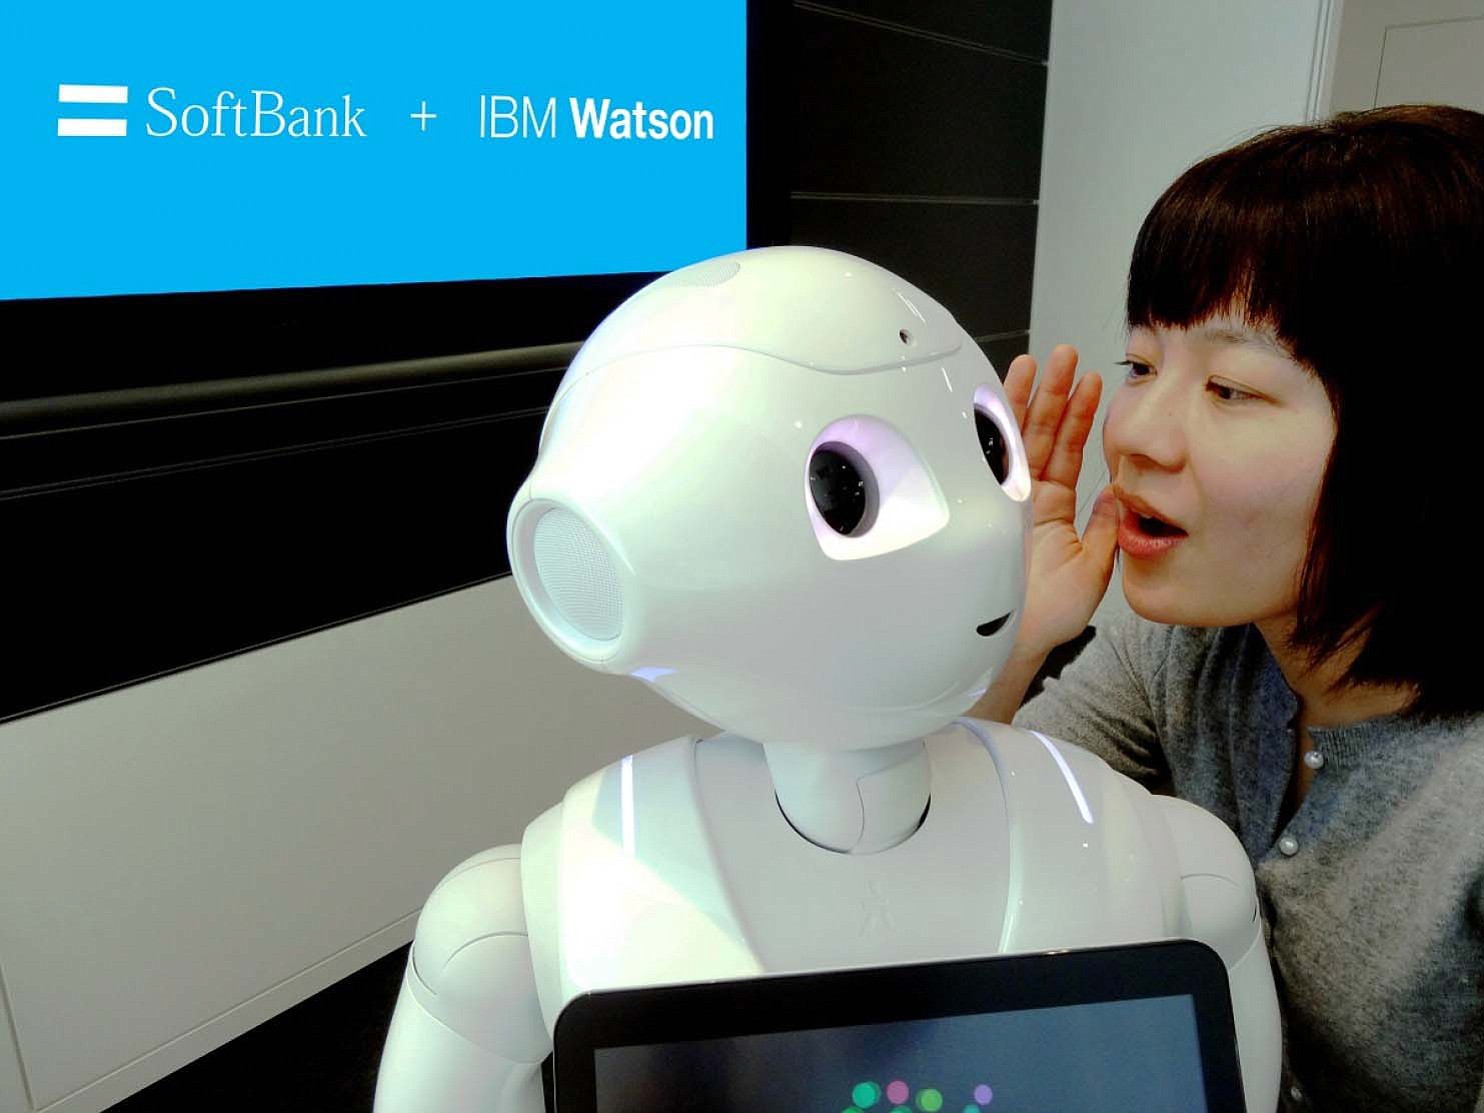 IBM
IBM Researcher Risa Nishiyama demonstrates SoftBank's Pepper robot, which uses the Watson computer. Watson, best known for winning a &quot;Jeopardy!&quot; match in 2011, is designed to take in huge amounts of information, process and learn from them in the same way the human brain does. Researchers now are working to teach Watson Japanese.